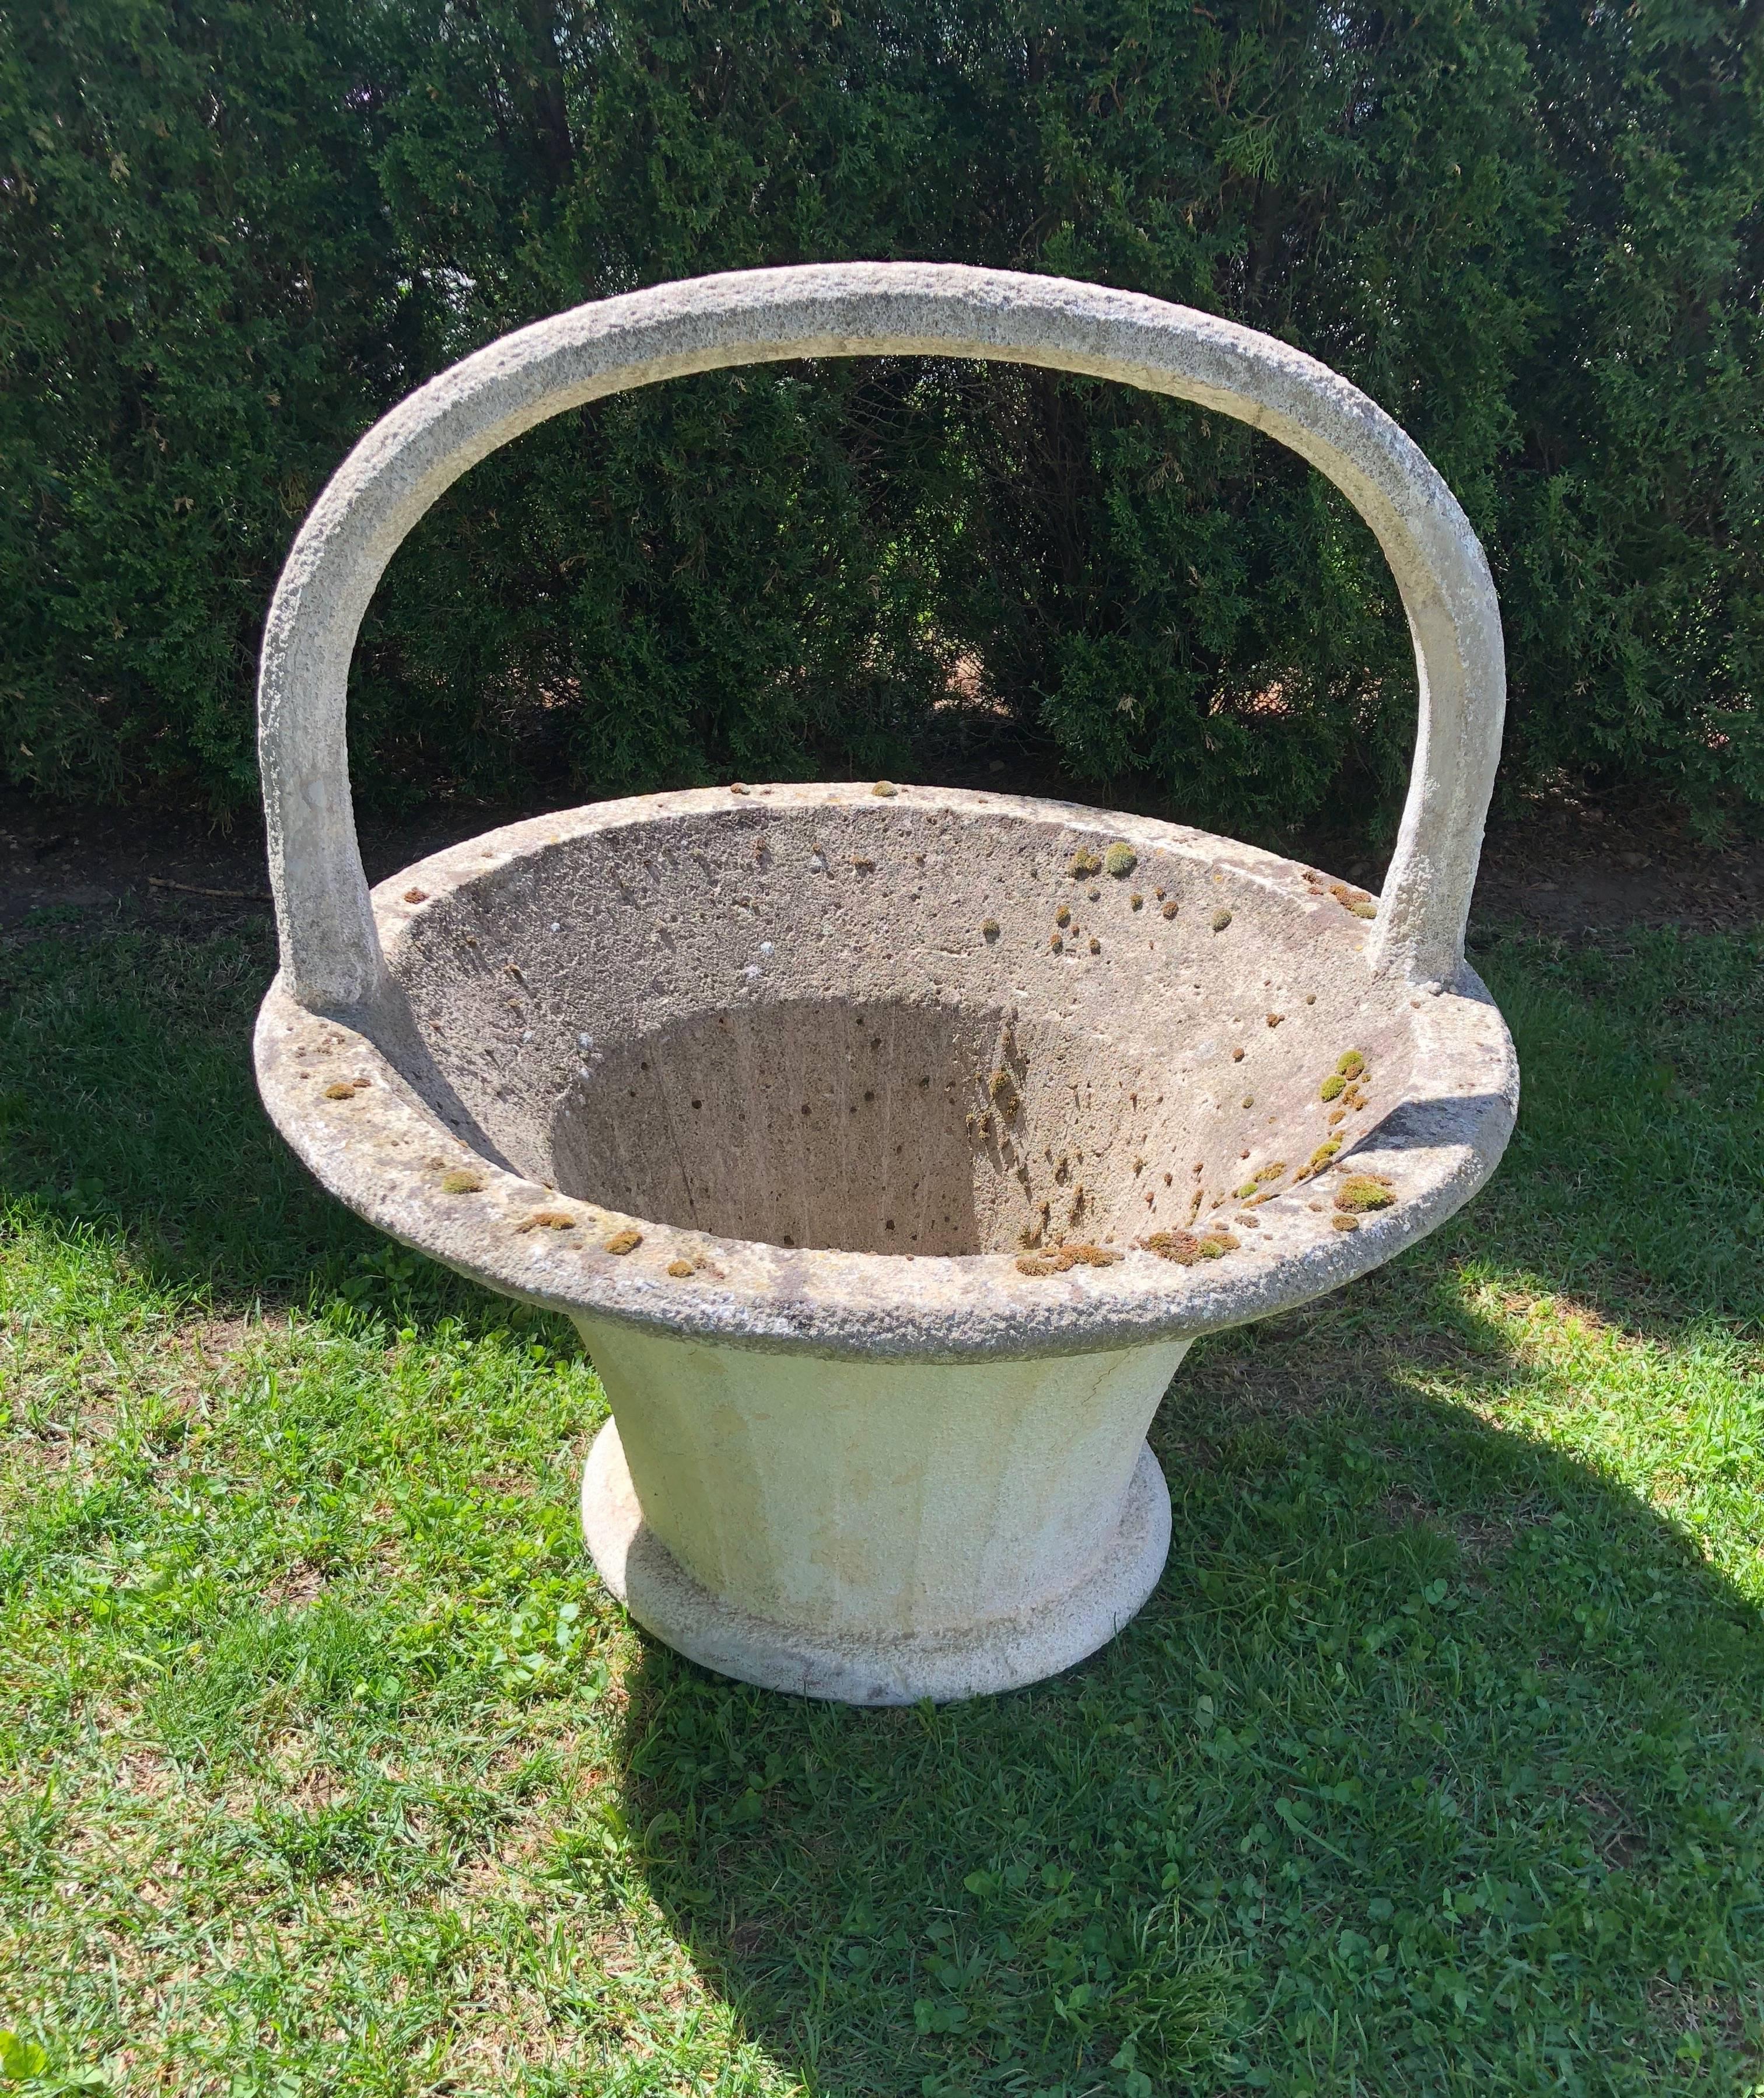 This garden basket is just amazing! Its huge size will accommodate a profuse planting and its beautifully weathered surface in old white paint with moss inside is stunning. Place in the center of an herb or perennial garden with a profuse